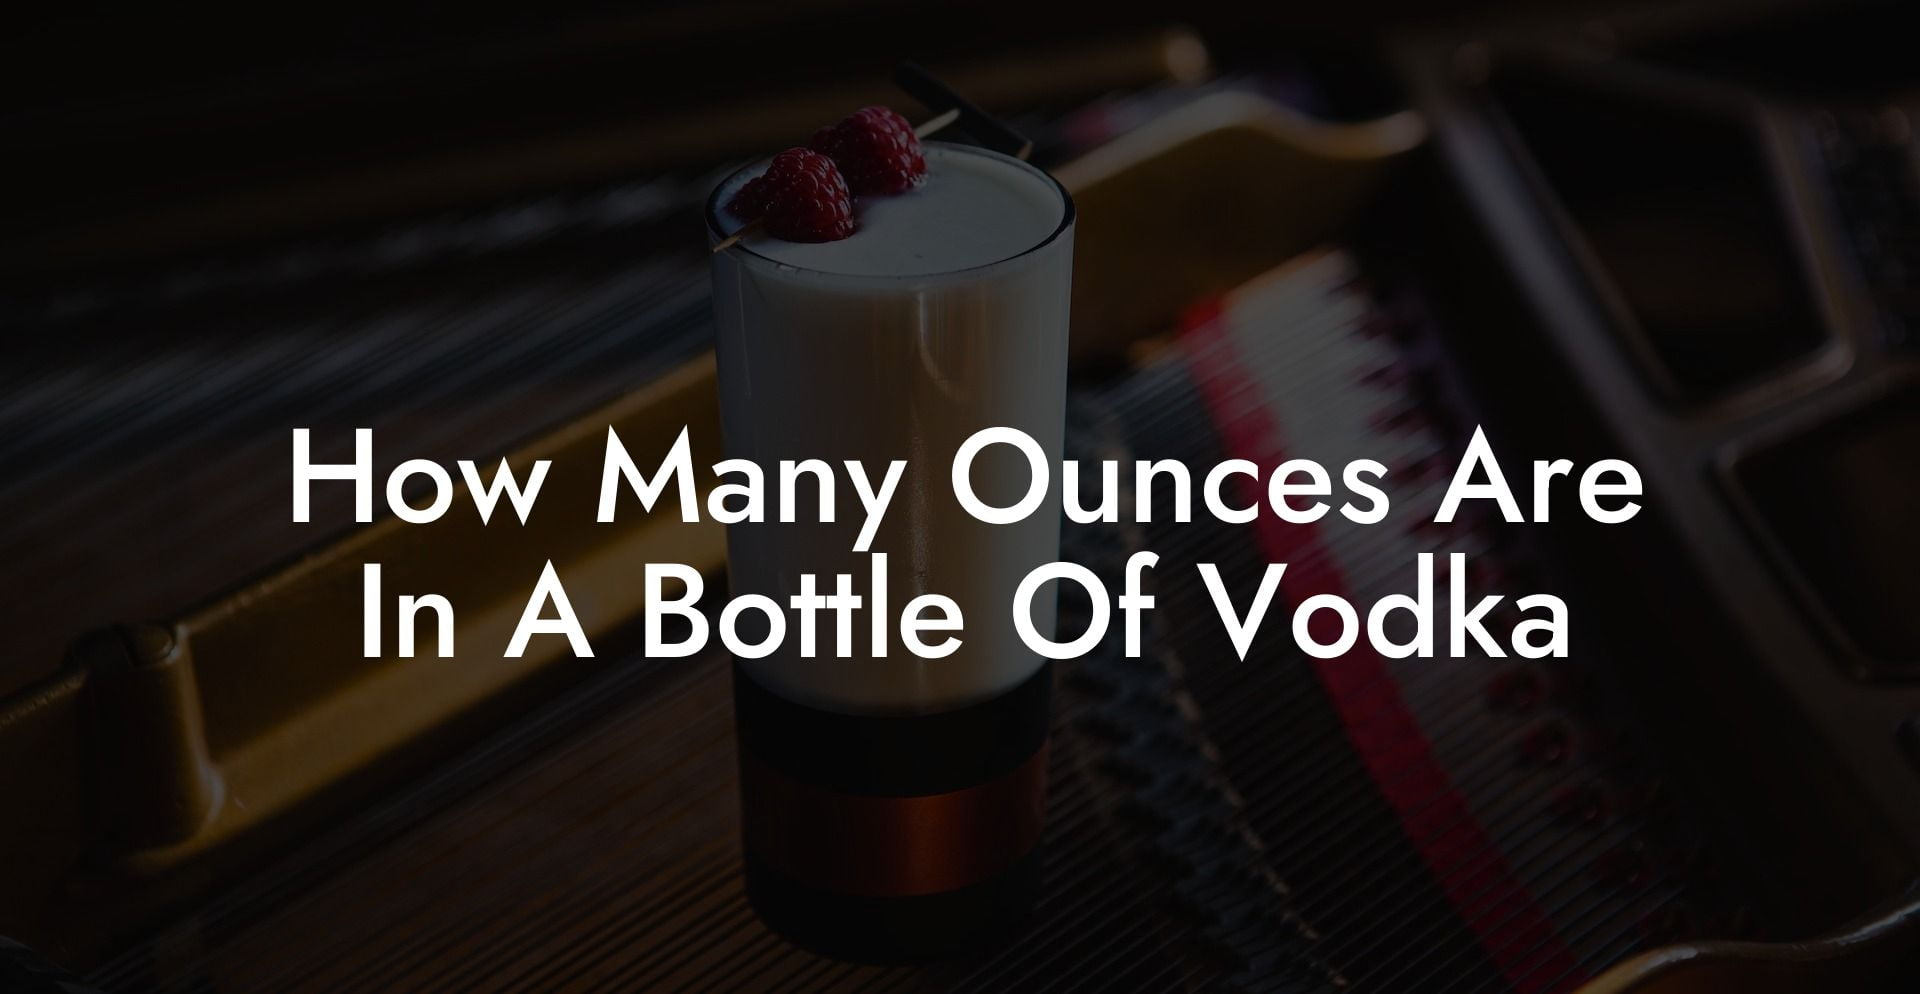 How Many Ounces Are In A Bottle Of Vodka